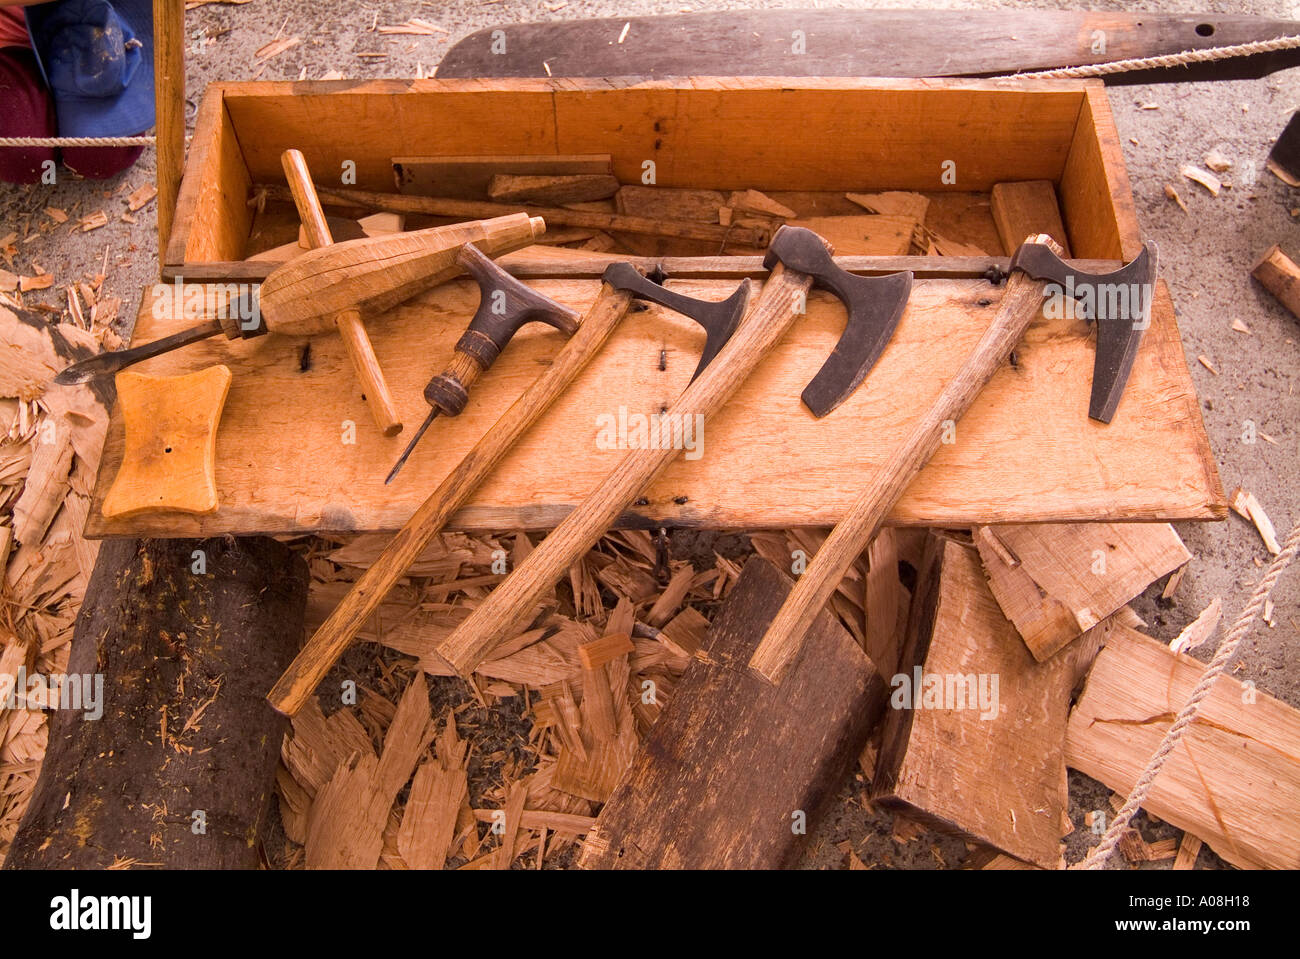 The simple traditional woodworking tools used by the ...